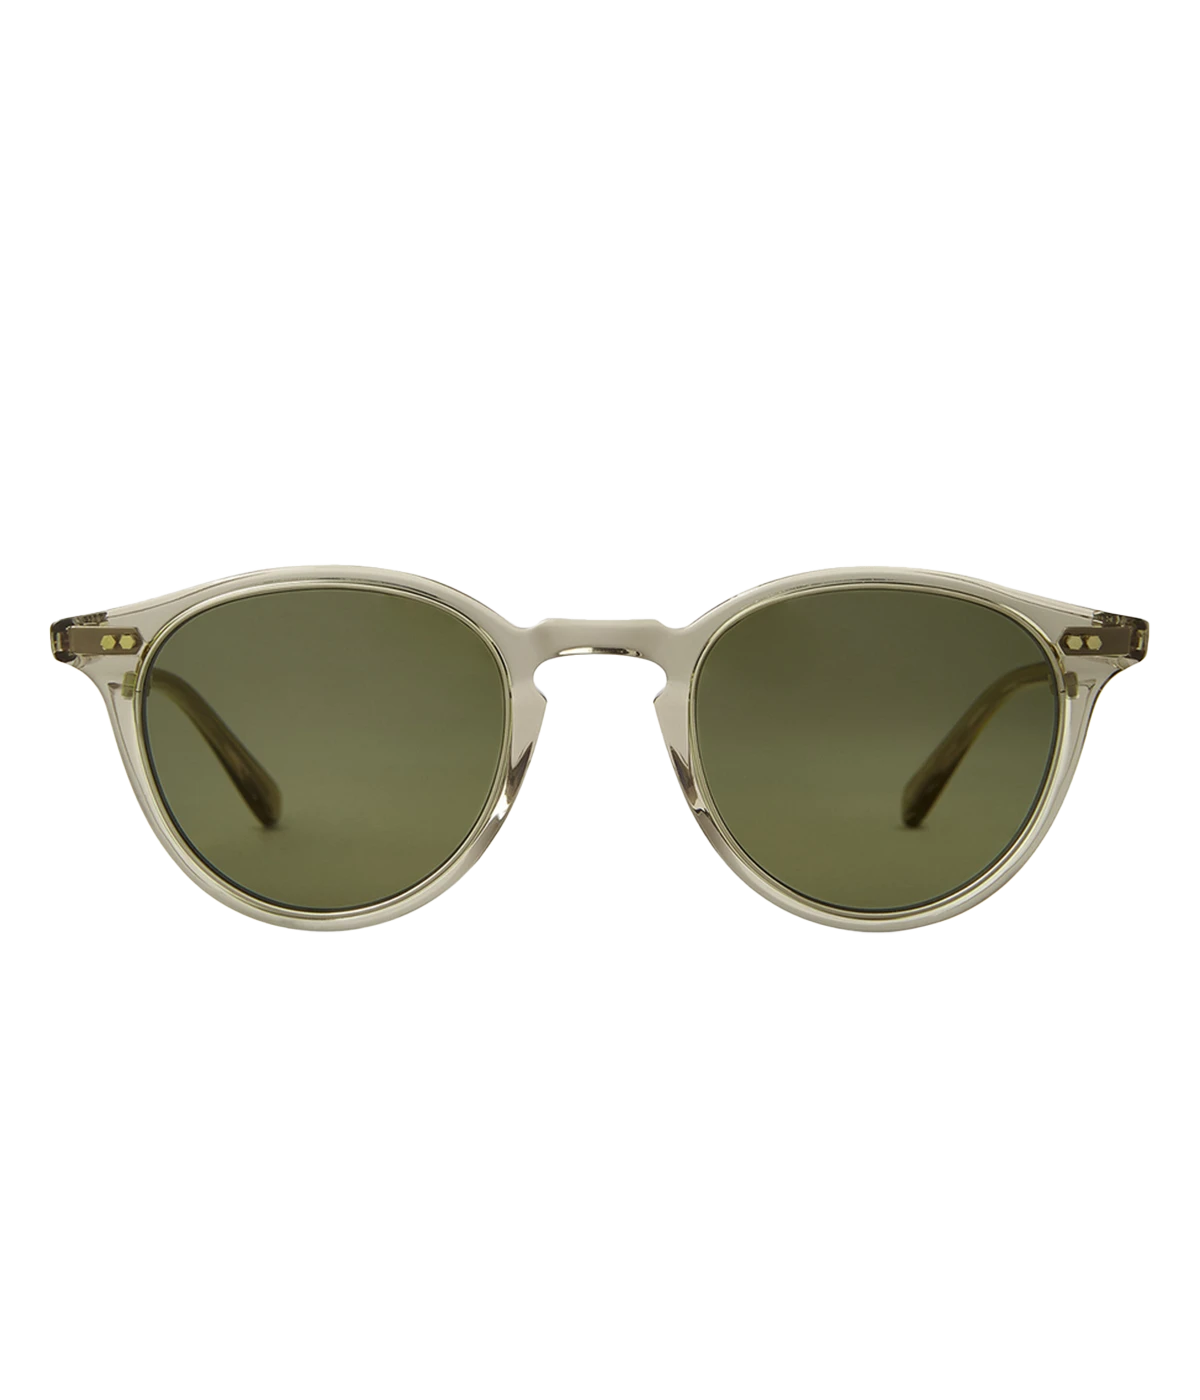 Marmont II S 48 Sunglasses in White, Gold & Green